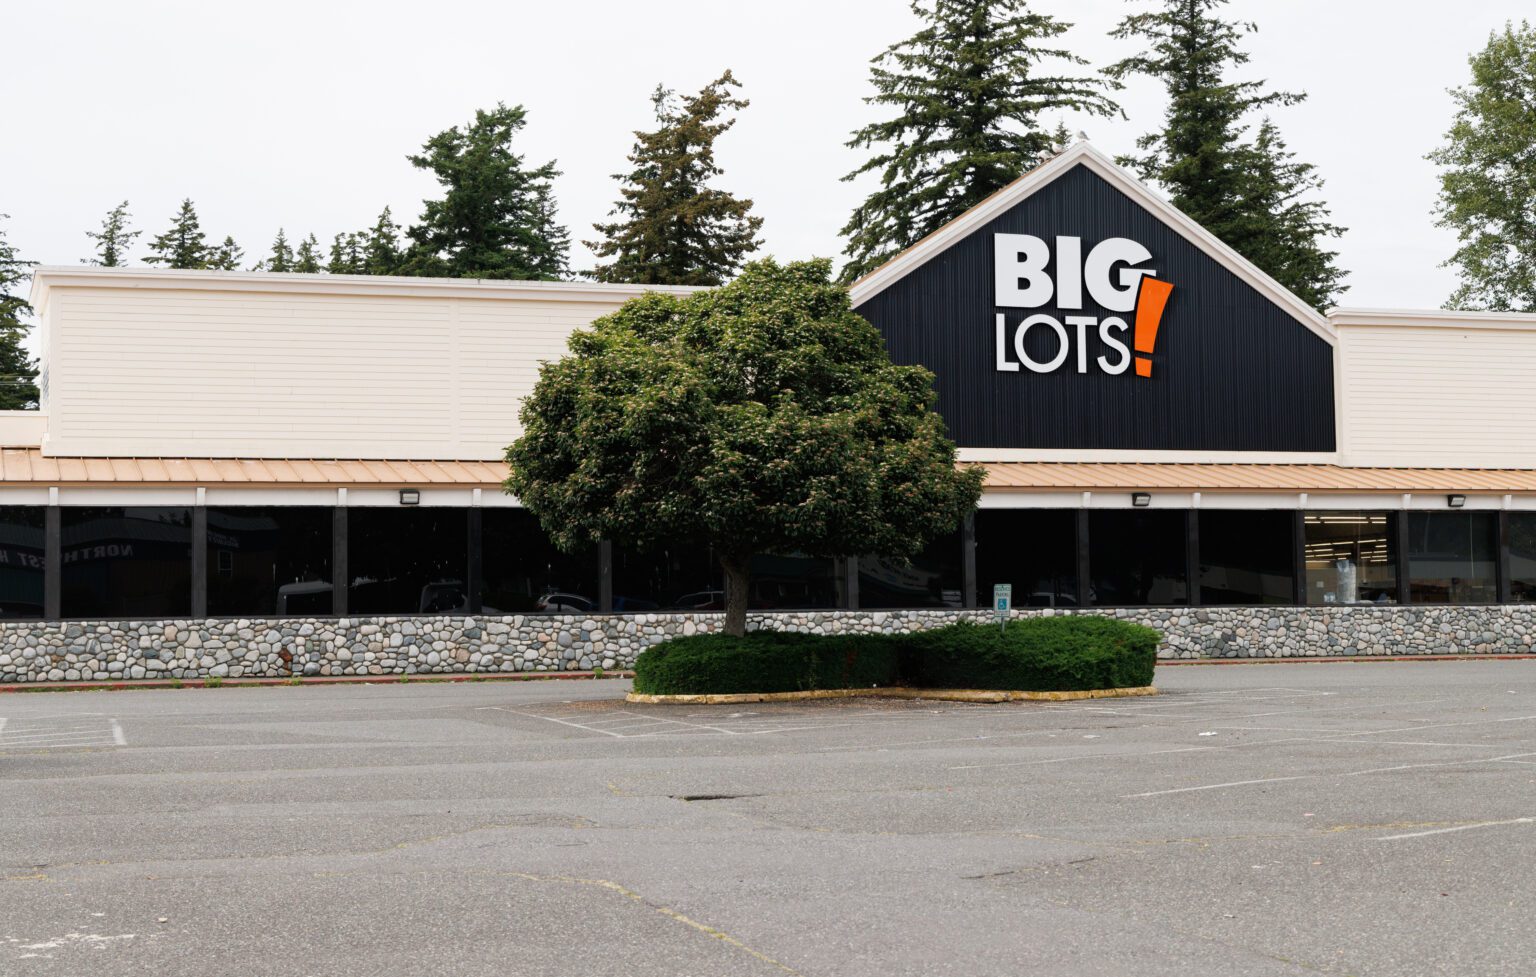 A Big Lots store moved into the former Albertsons location in Birchwood in 2019. Despite legal obstacles